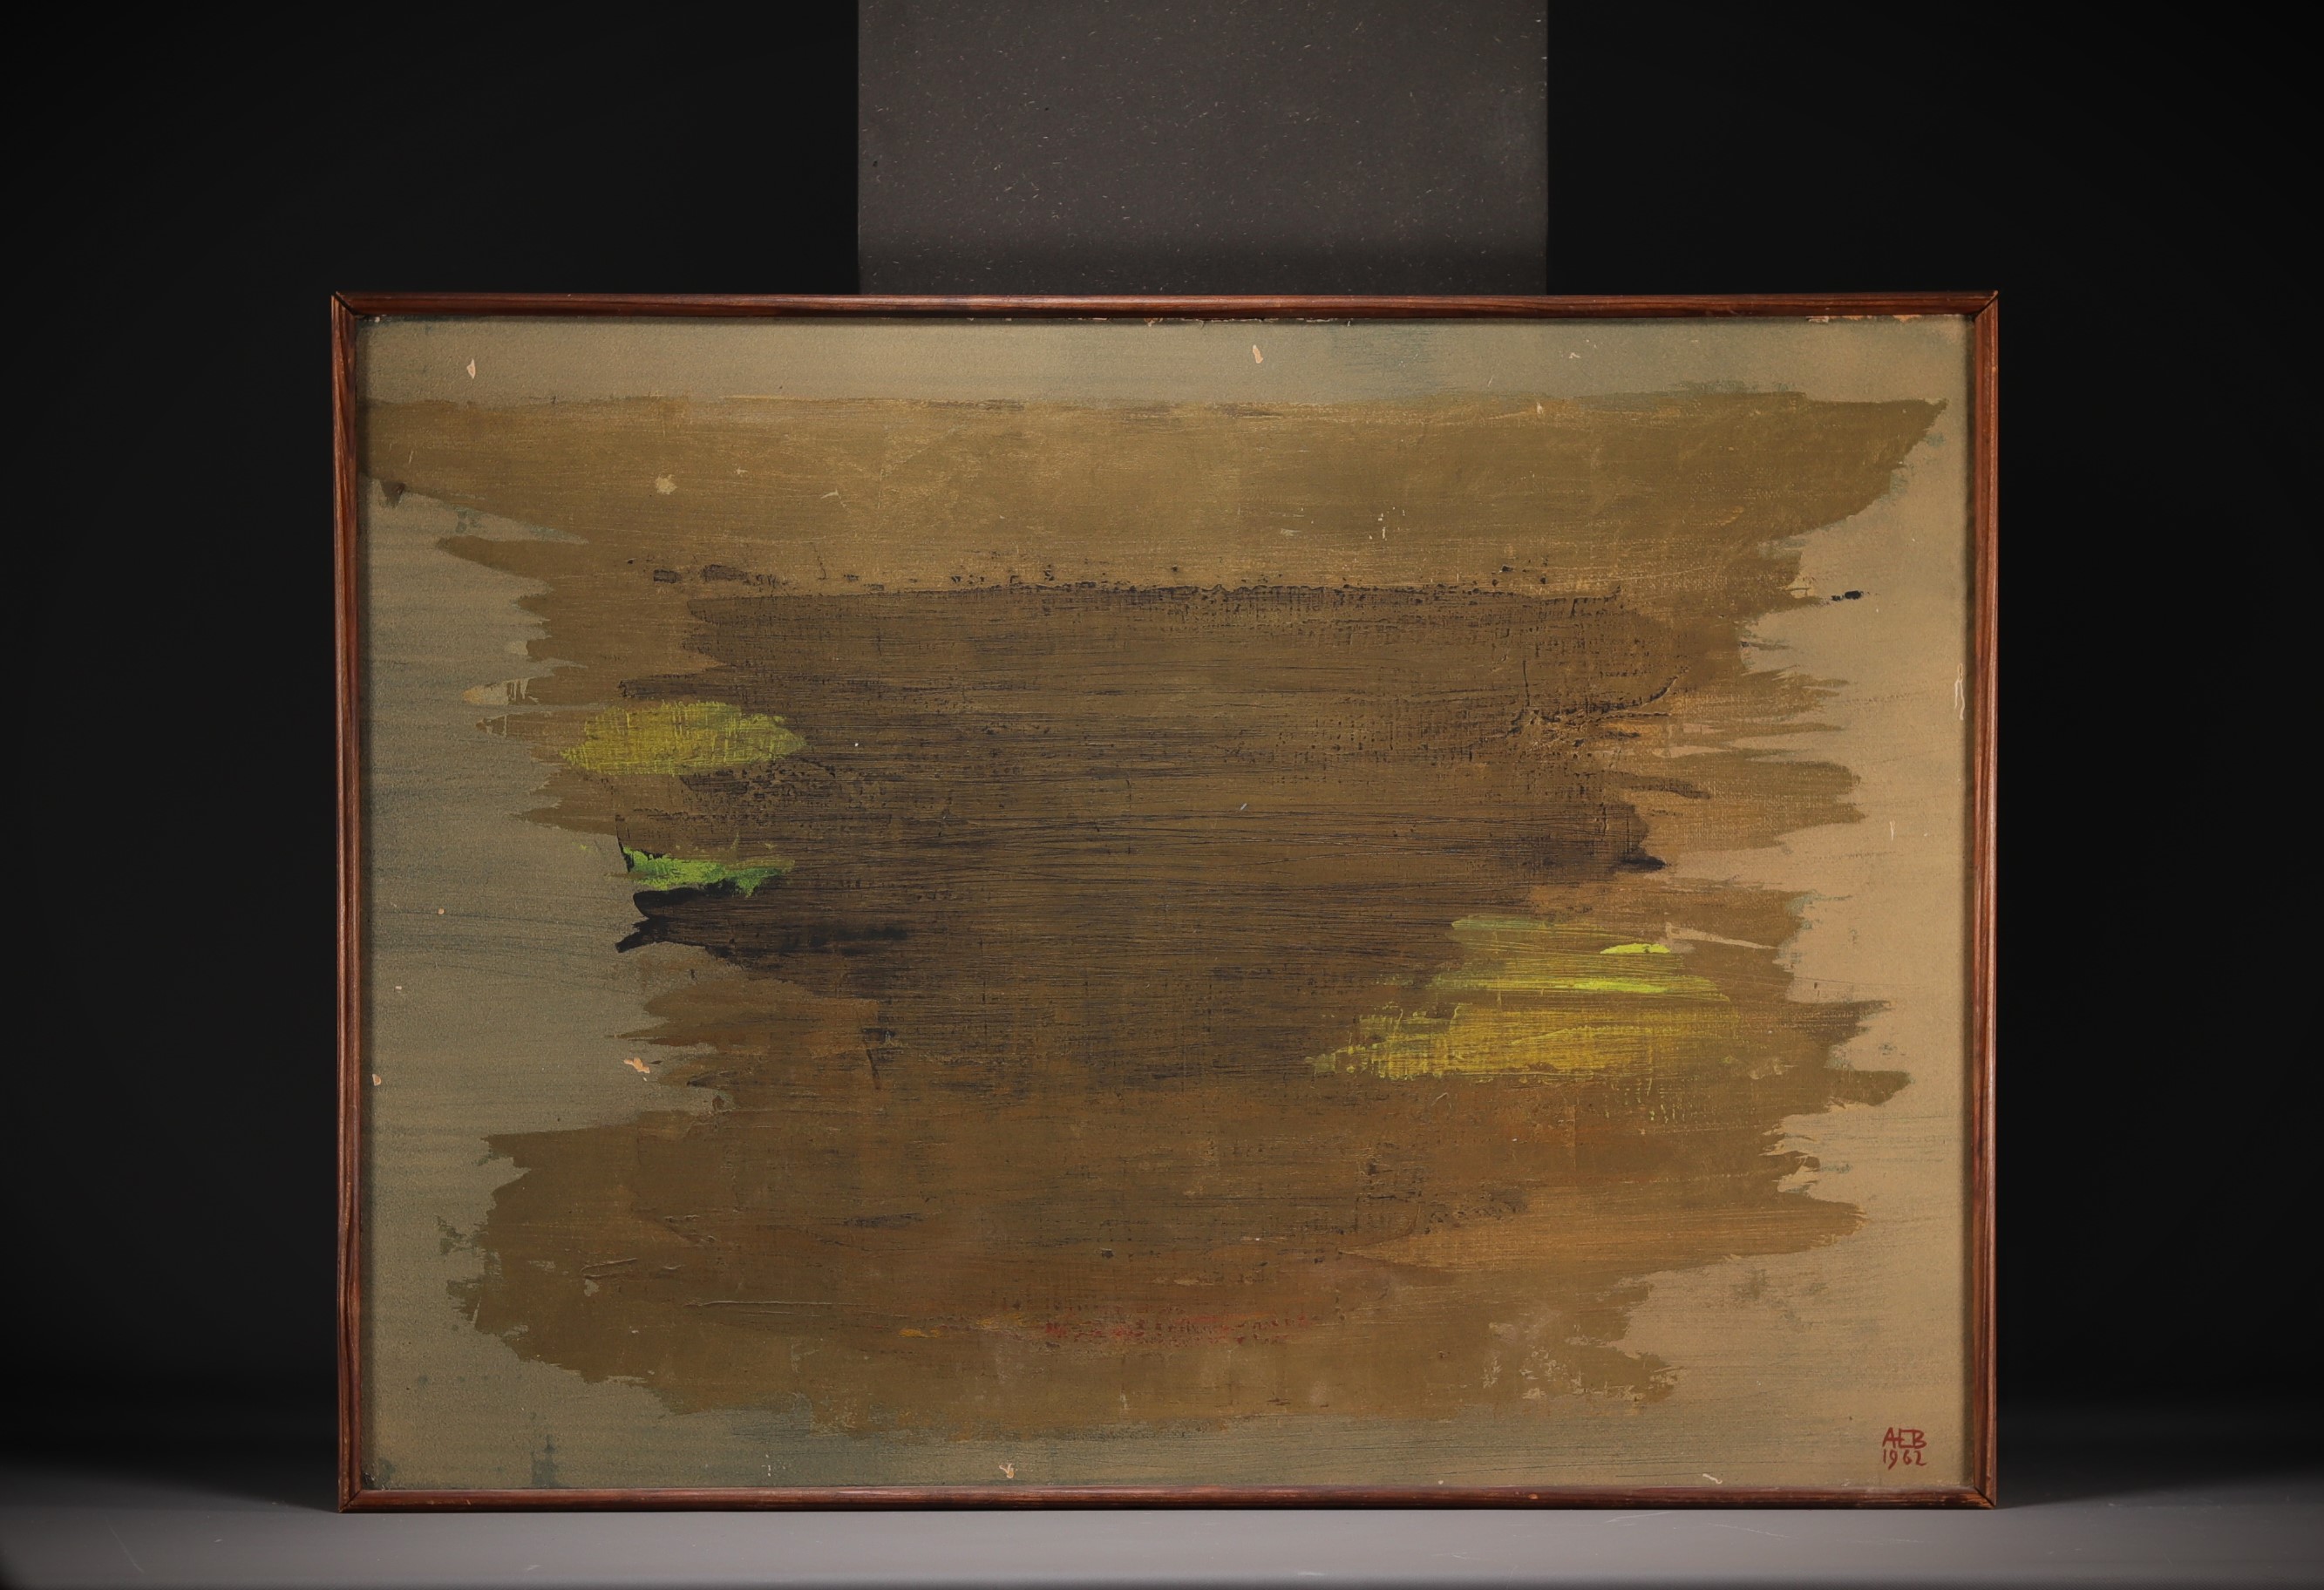 Anna Eve BERGMAN (1909-1987) Tempera, mixed technique with gold leaf on paper, 1962. - Image 2 of 2